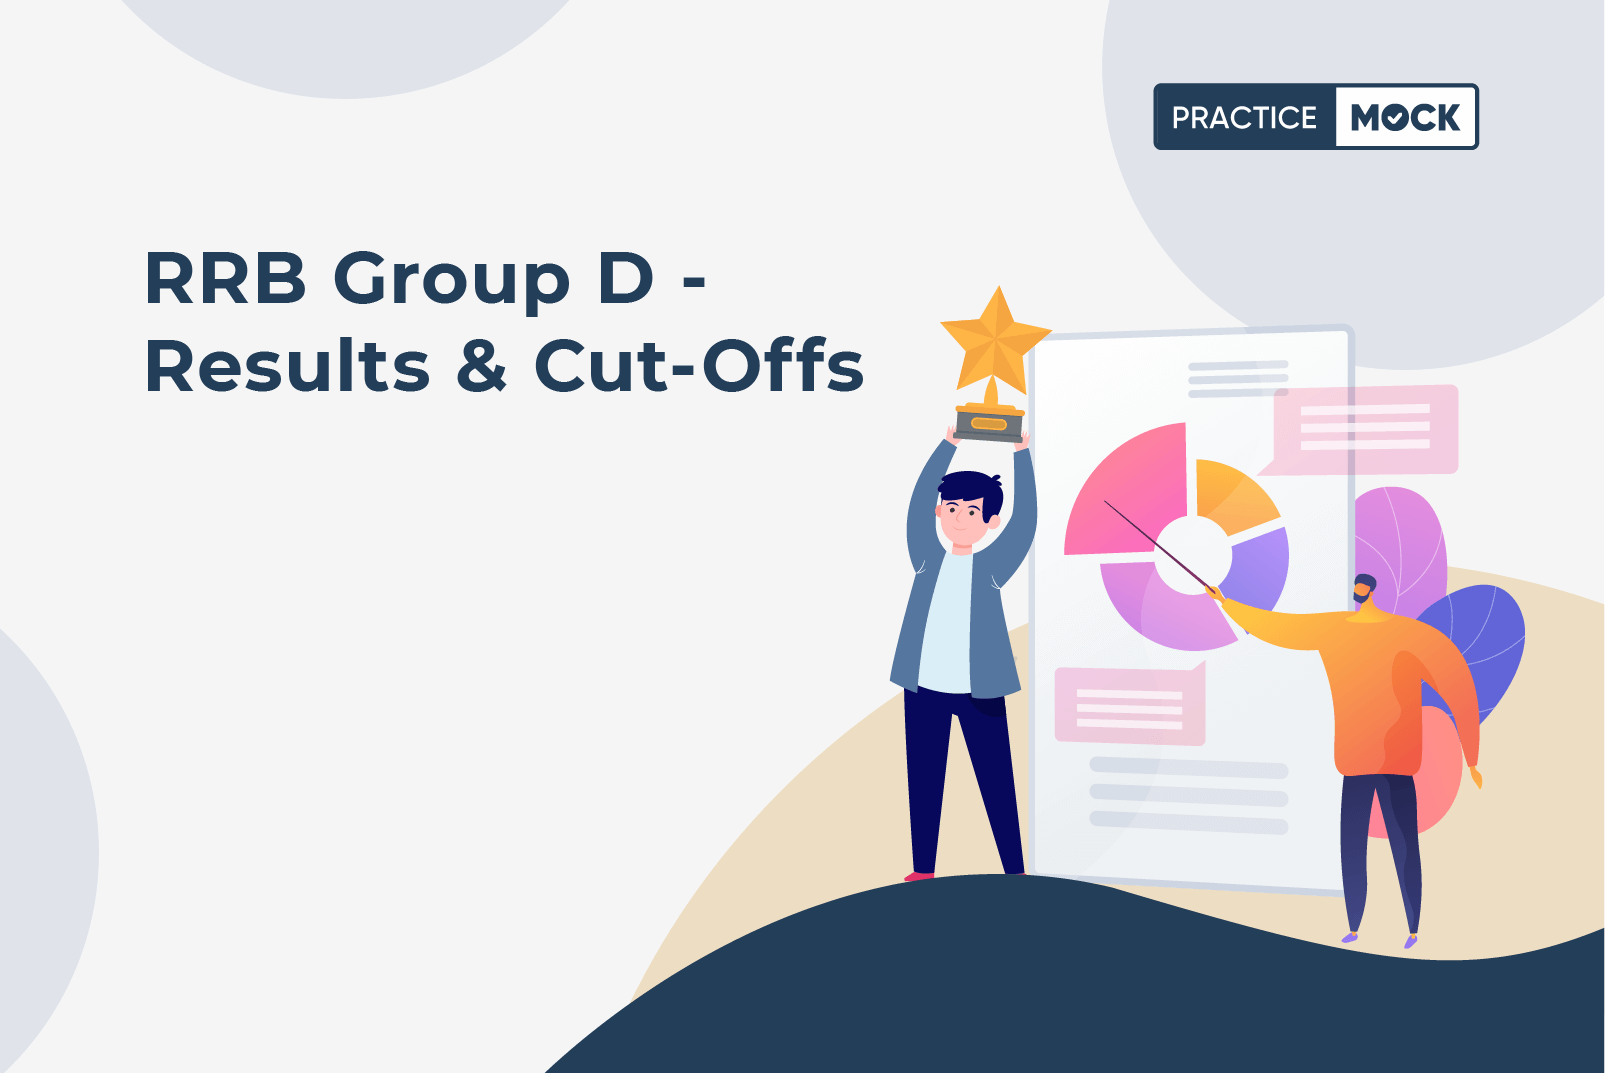 RRB Group D Bhopal Region- Results & Cut-Offs